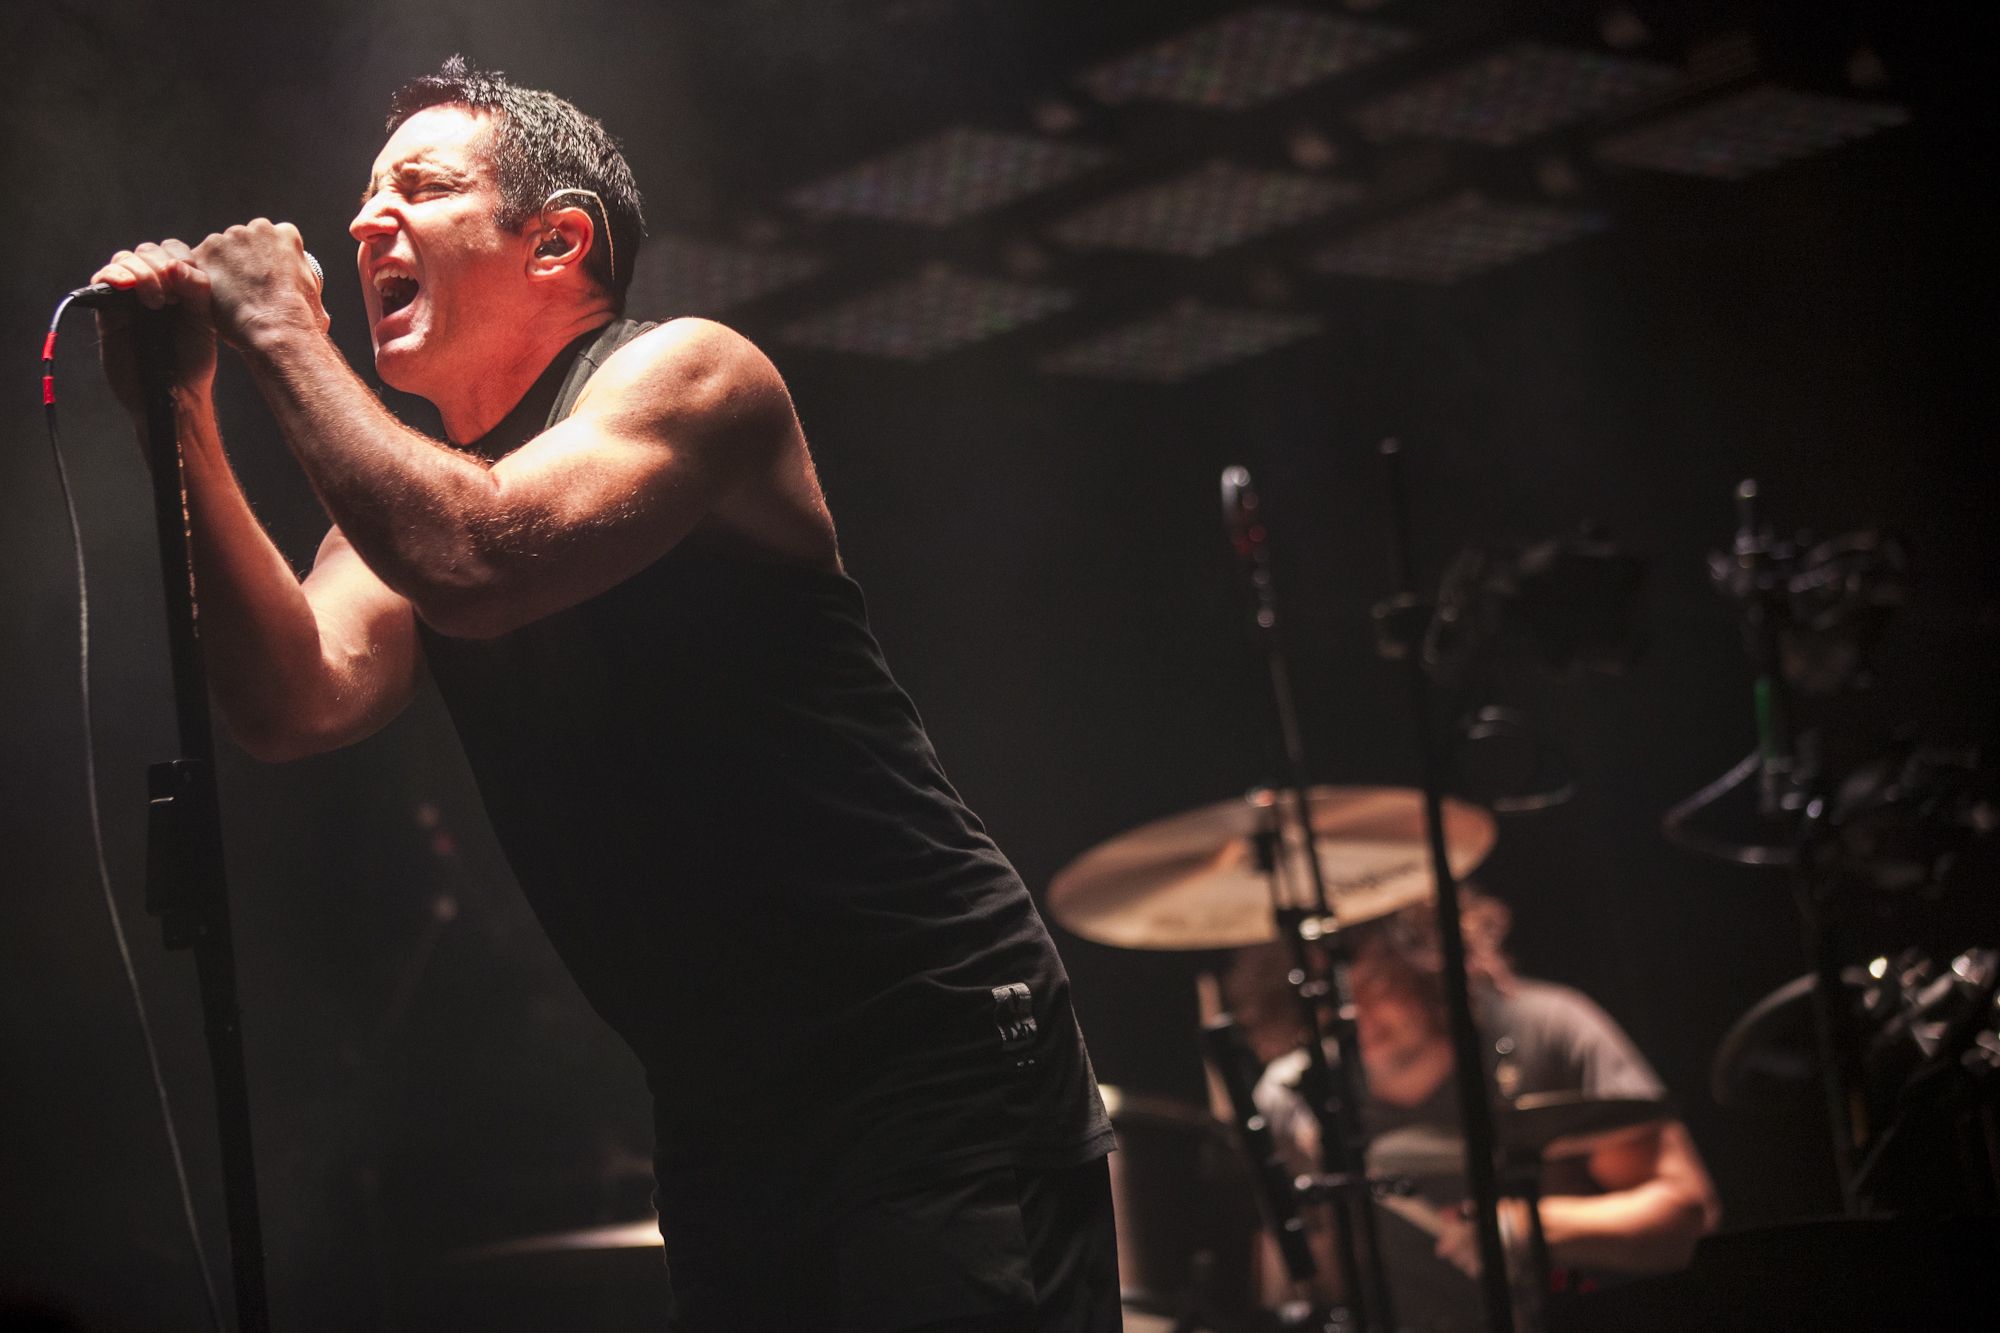 Concert review Nine Inch Nails at the Bell Centre;